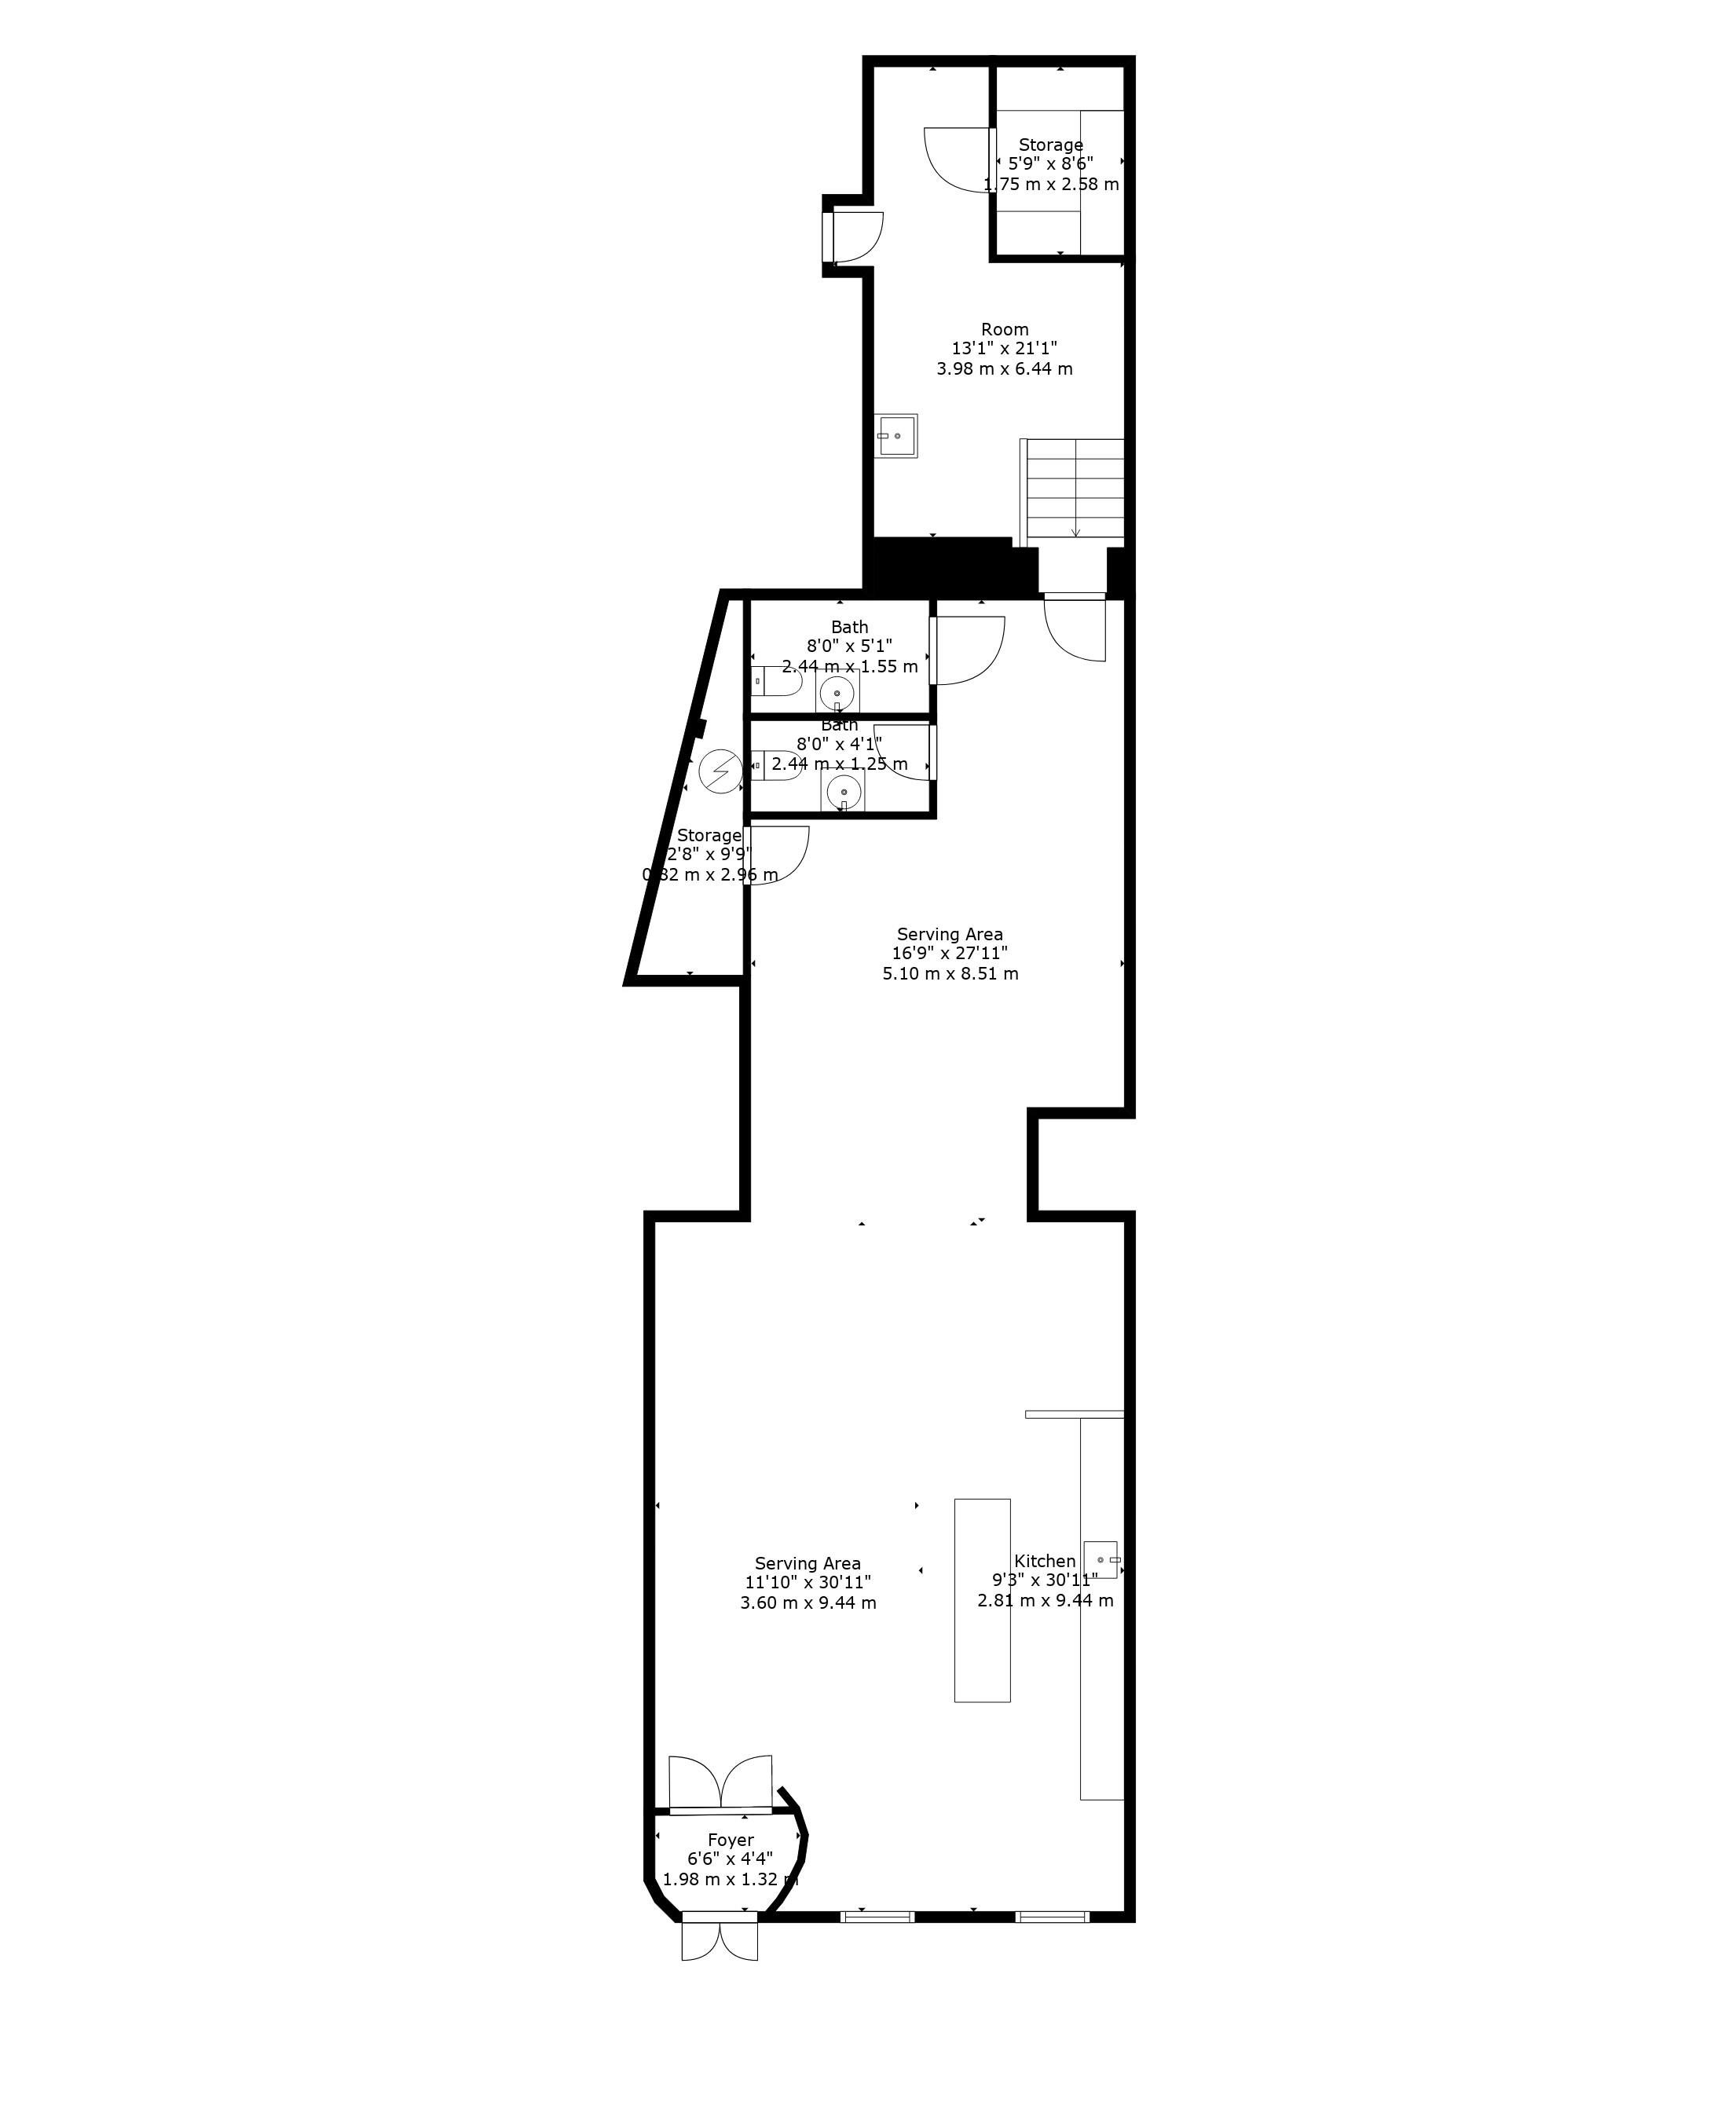 Floorplans For Lord Street, Southport